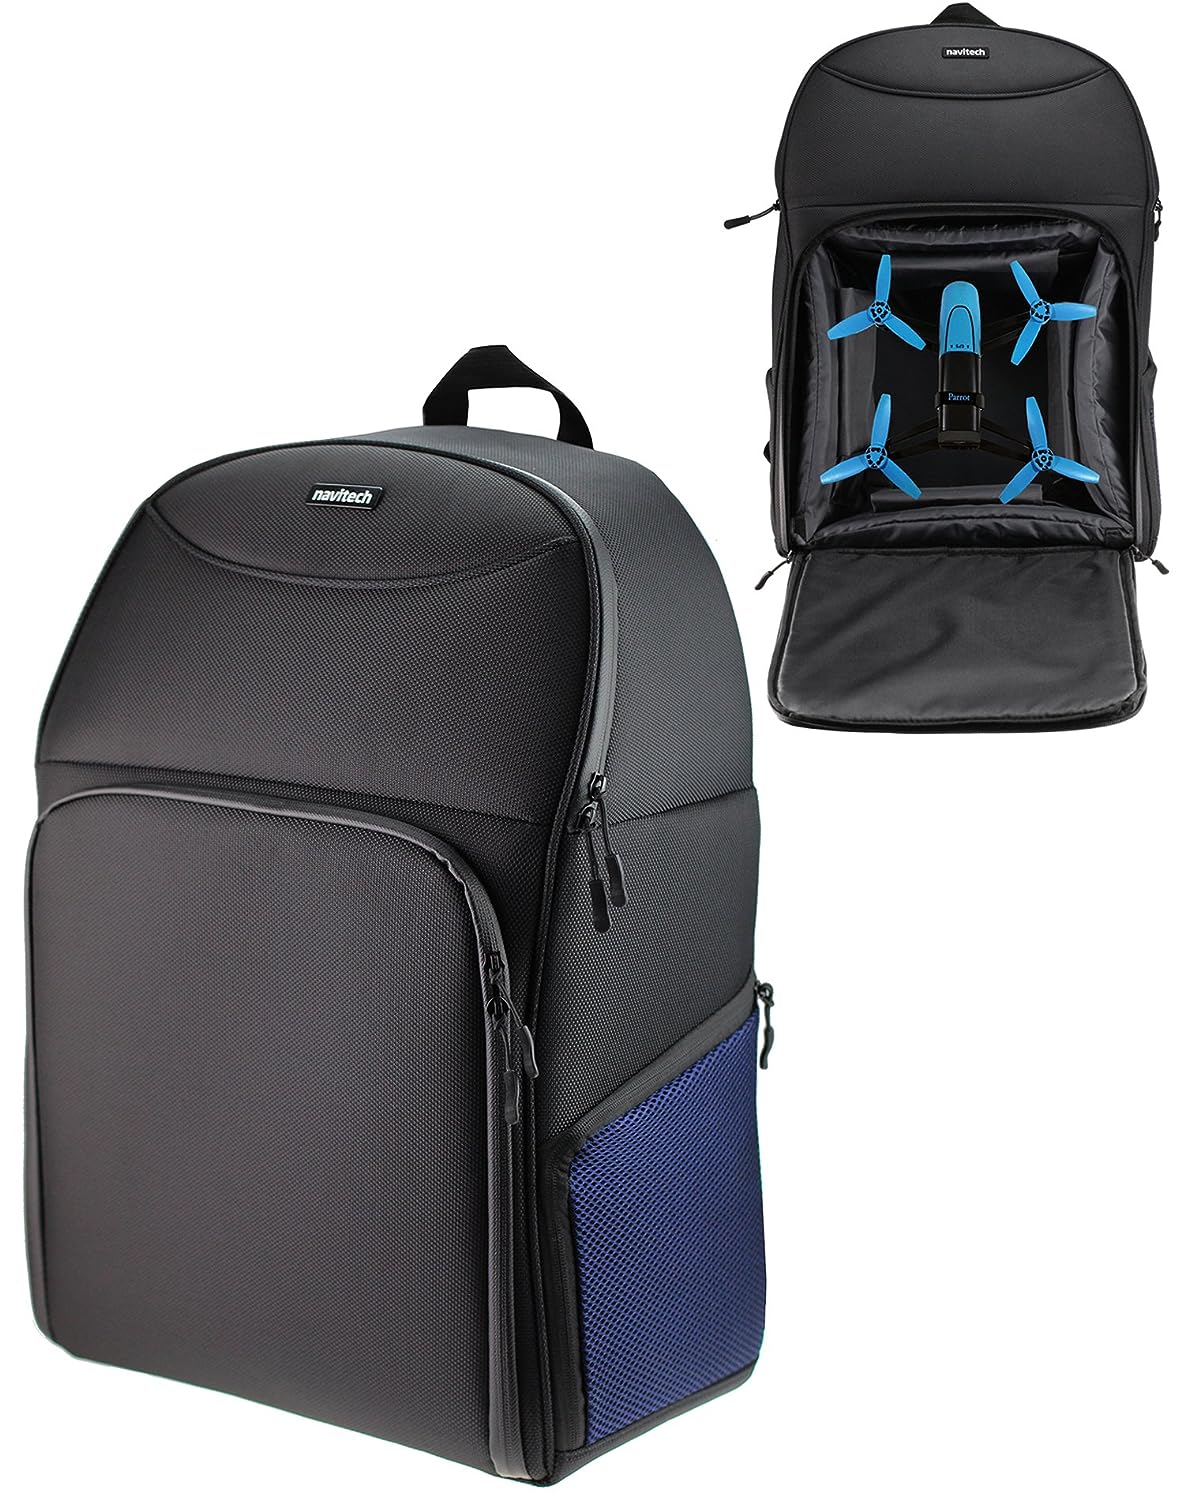 Navitech Rugged Black & Blue Backpack/Rucksack Compatible with The Drones/Quadcopters Including The Parrot Bebop Drone/Parrot Bebop 2